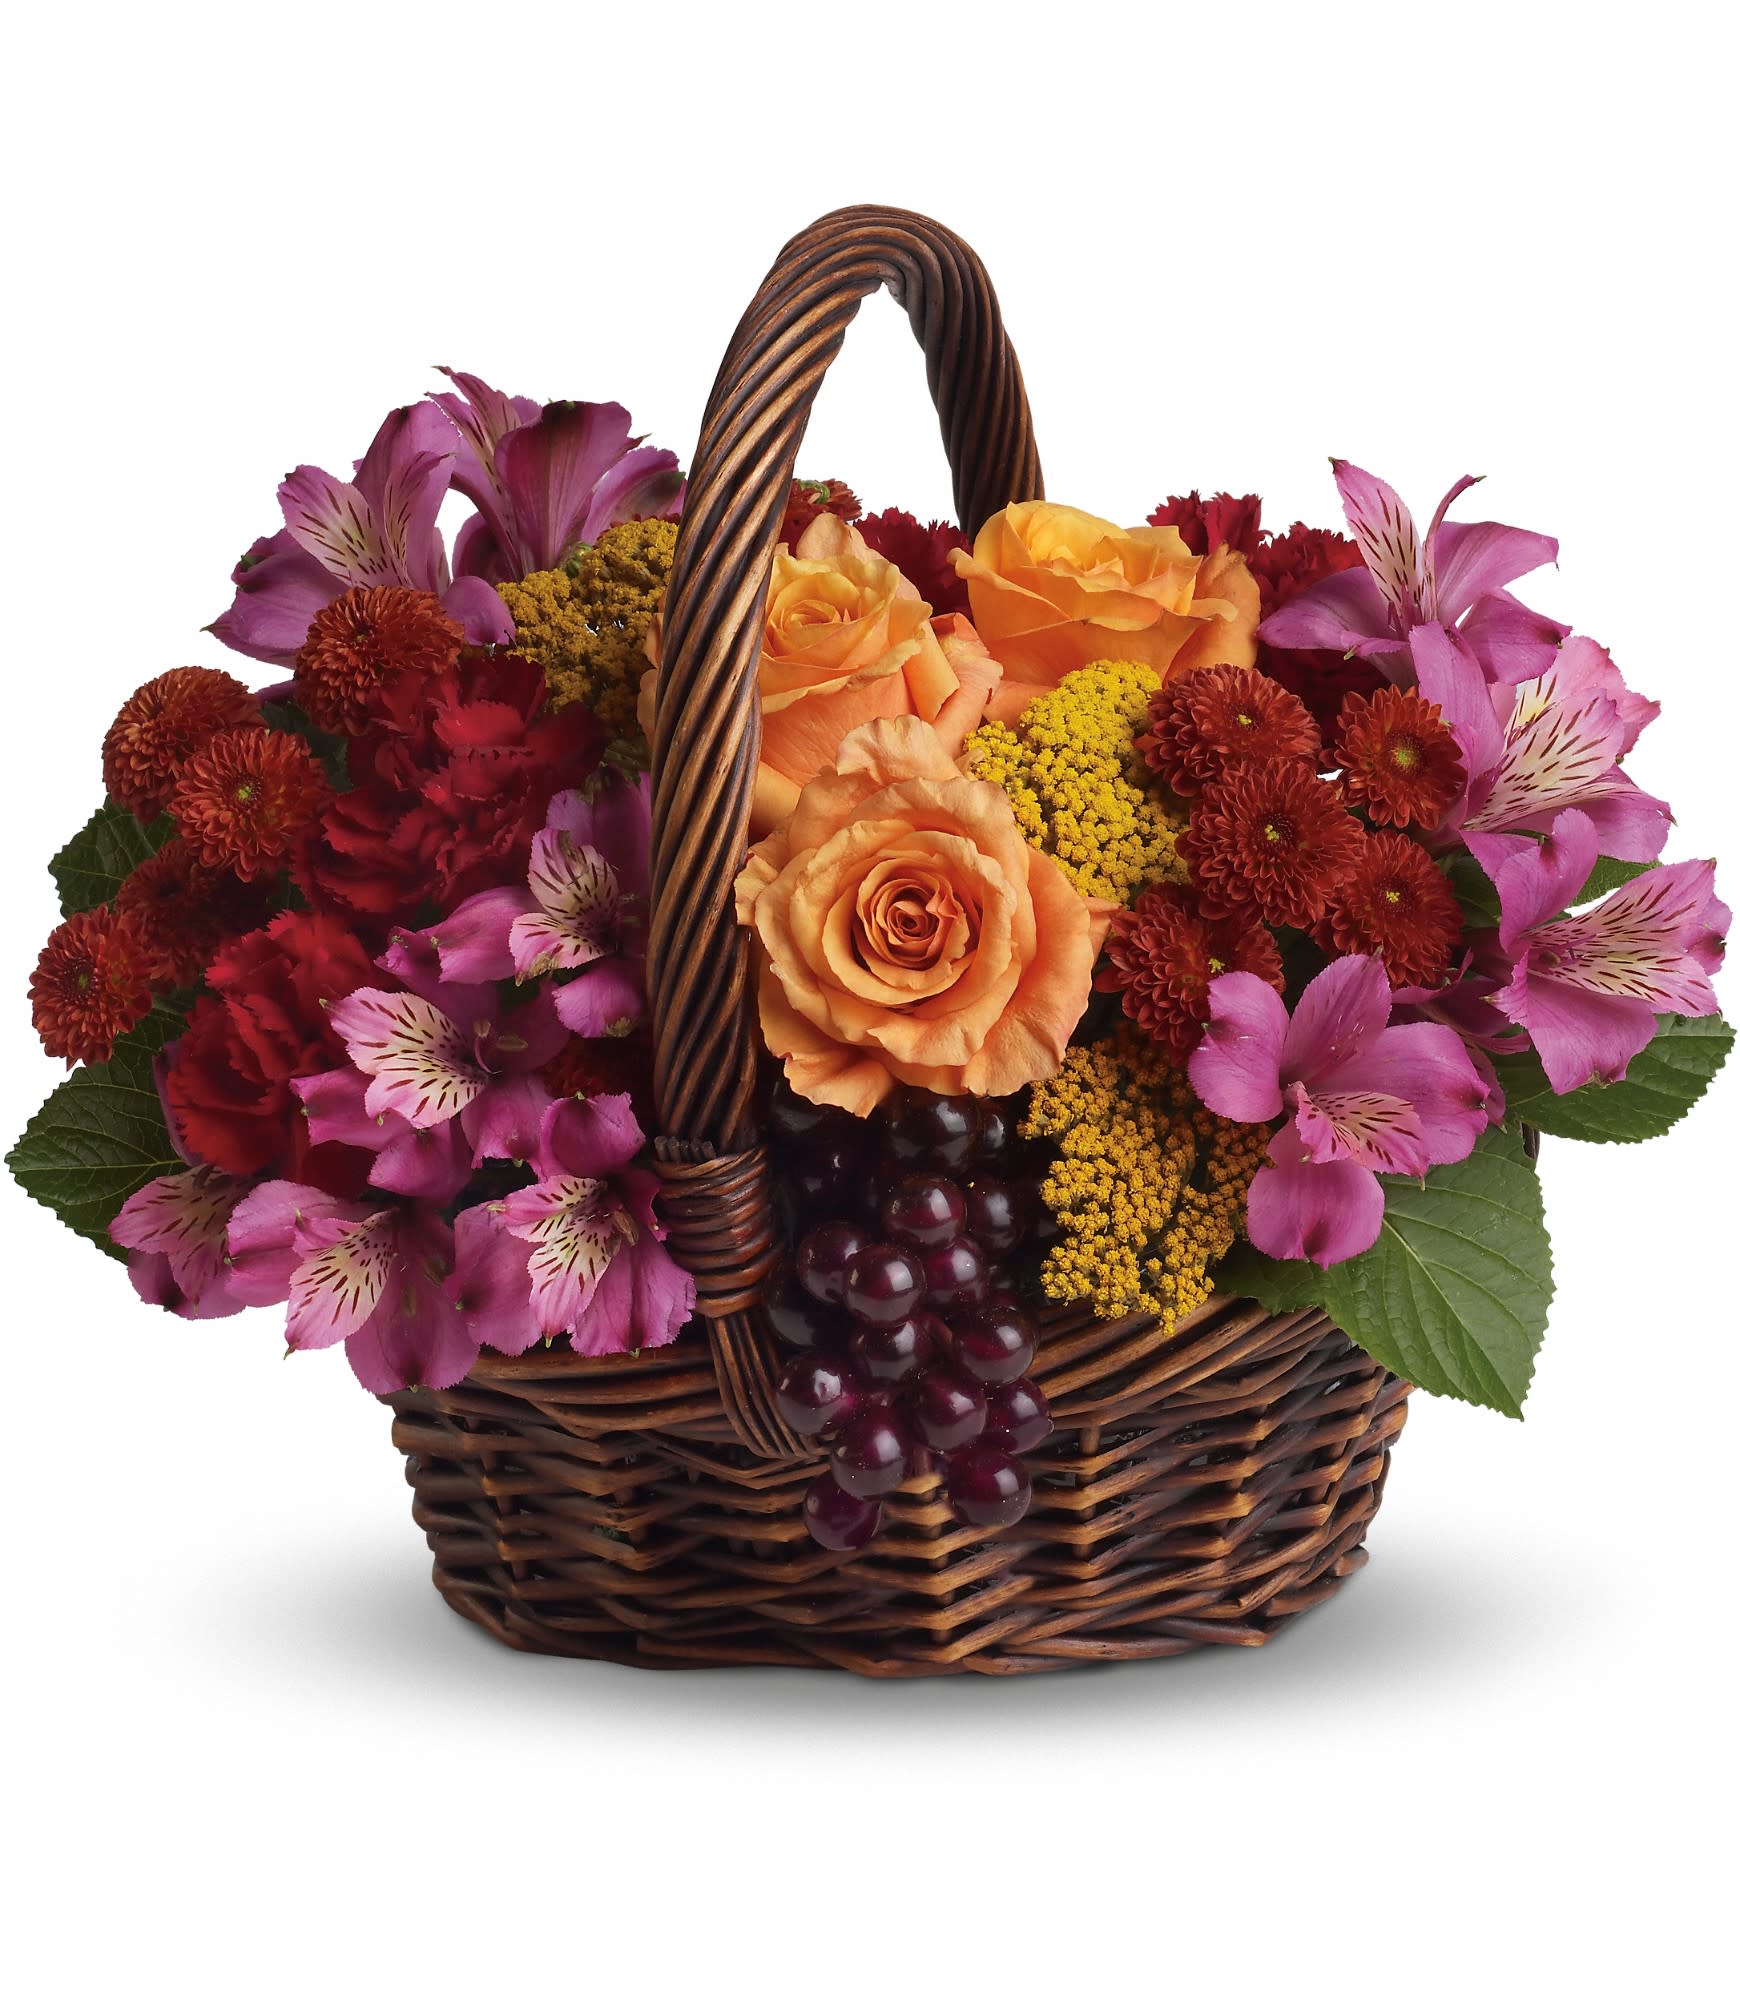 Sending Joy - The basket overflows with orange roses and spray roses, maroon carnations, purple alstroemeria, burgundy button spray chrysanthemums, yarrow and even a bunch of grapes (not real, of course)! Approximately 13 3/4&quot; W x 11 3/4&quot; H. T173-3A